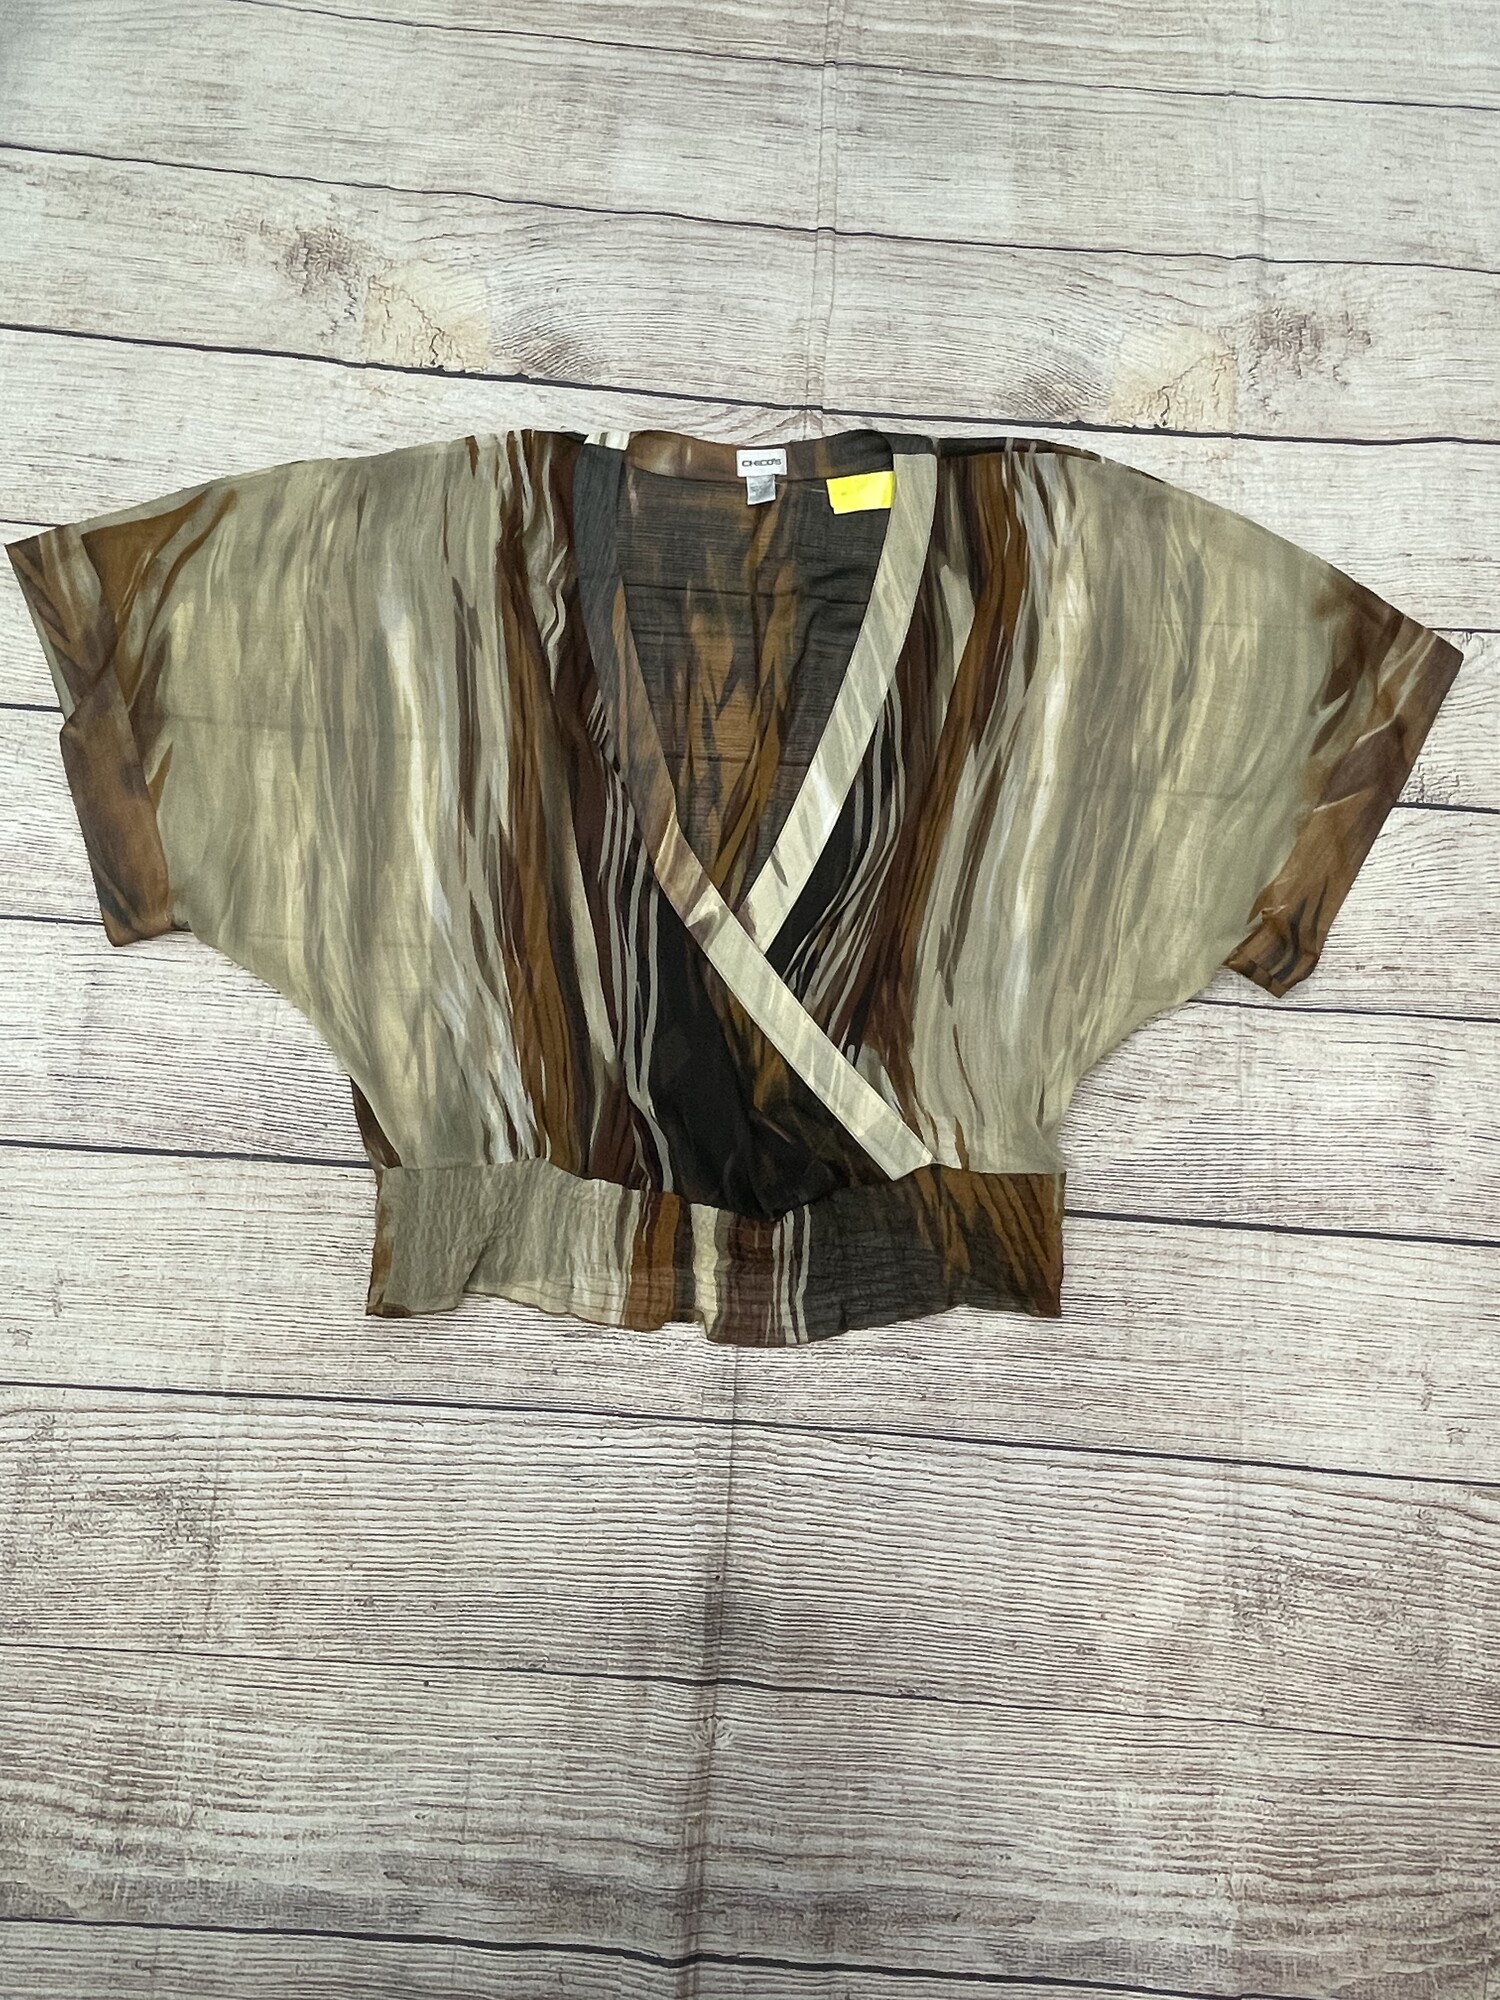 Chicos Sheer Top, SS, Brown and Tan Stripes, Long V-Neck, Elastic Waist, Size: Large (Chicos 2)